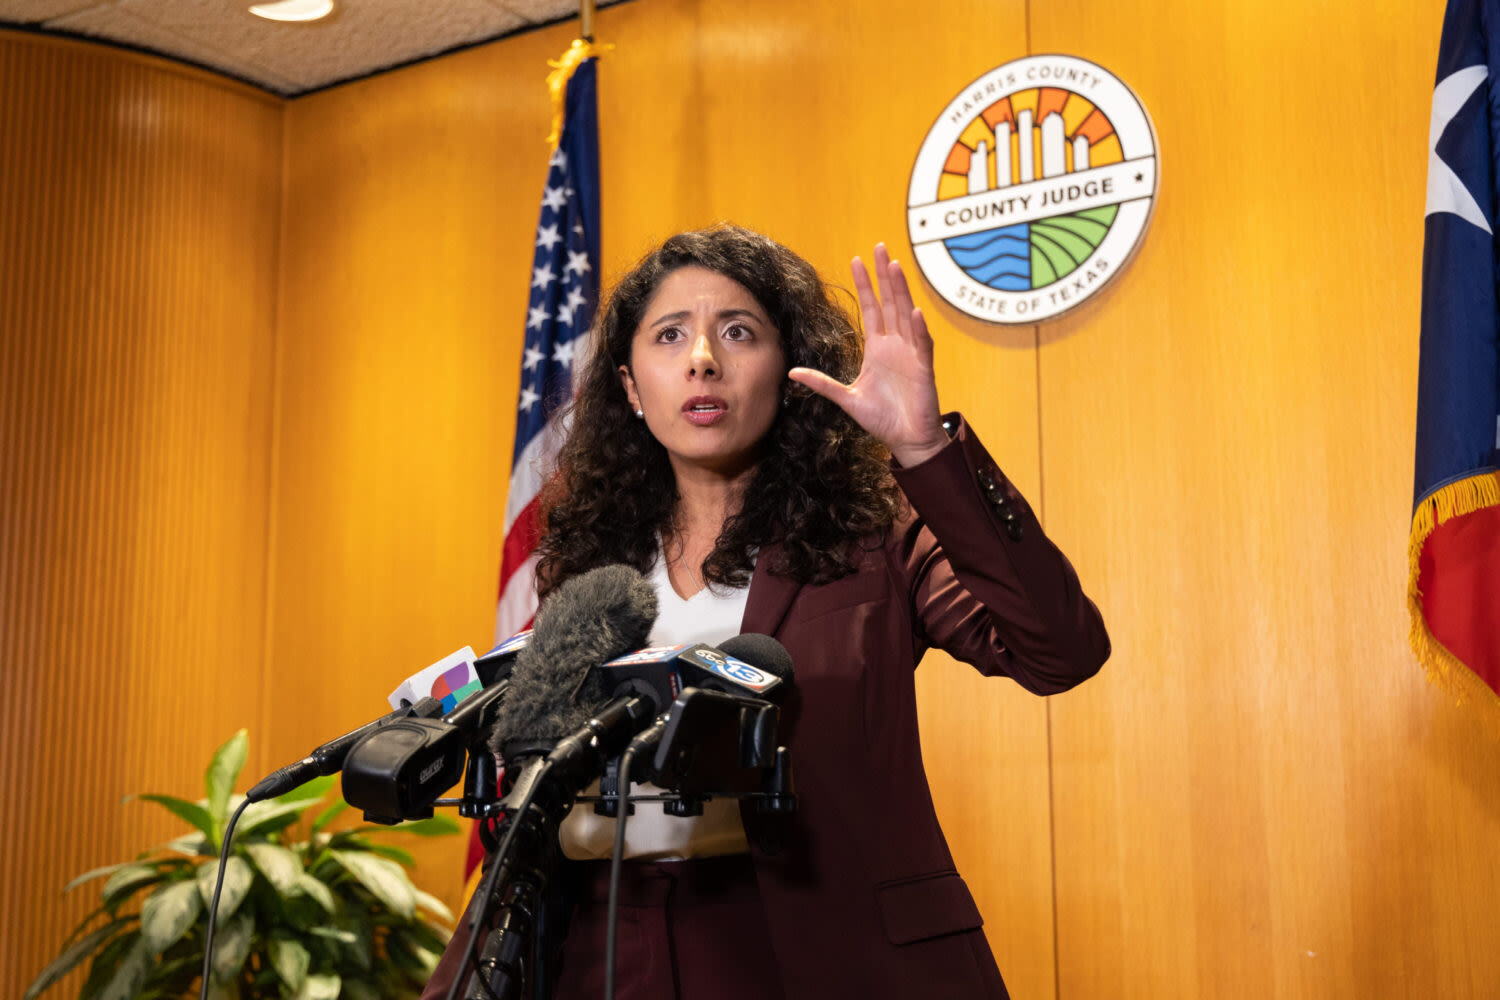 Harris County Judge Lina Hidalgo vs. Annise Parker in 2026 would be ‘very tight race,’ says Houston political expert | Houston Public Media